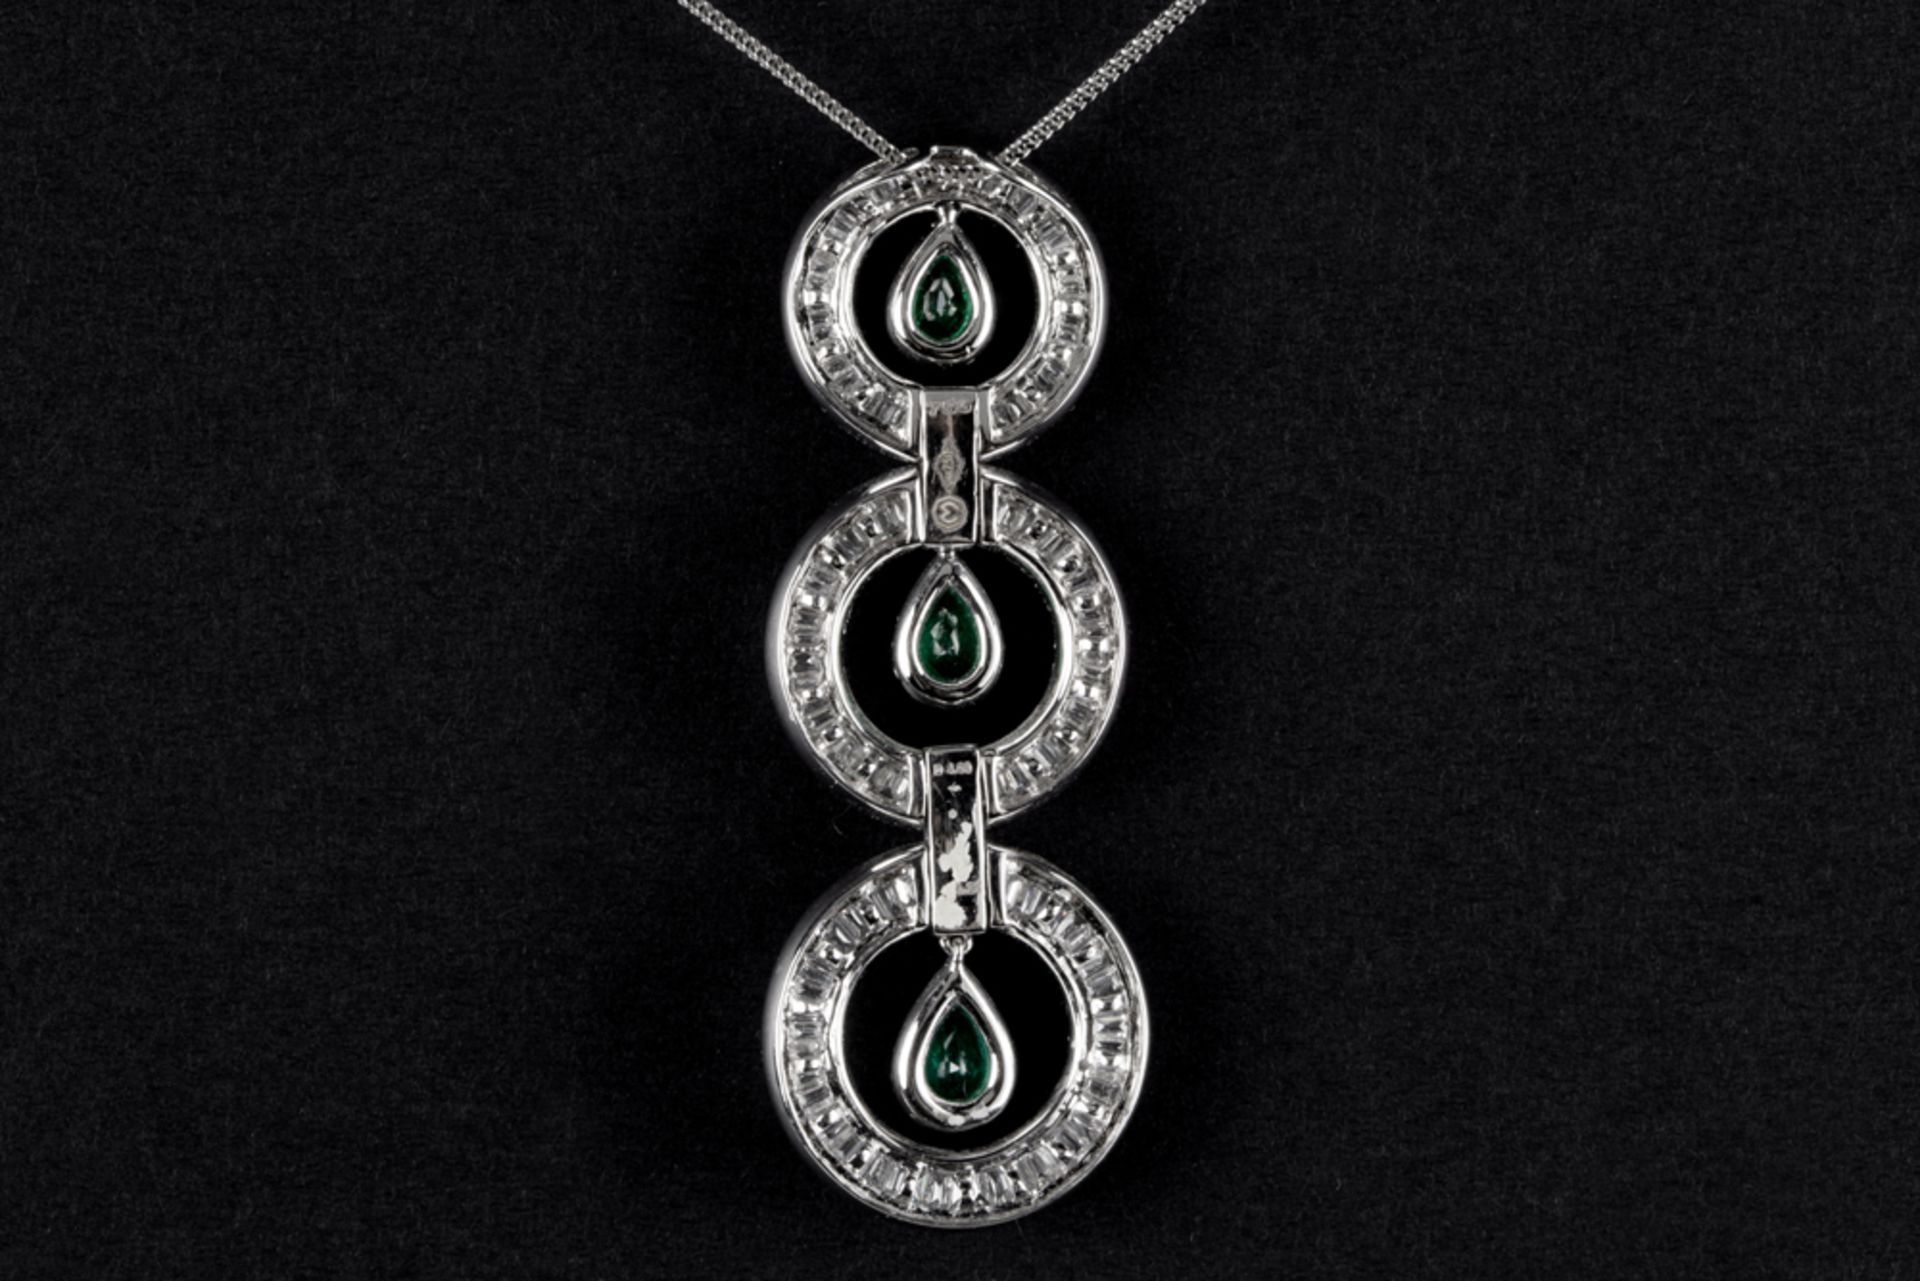 quite special pendant in white gold (18 carat) with ca 1,60 carat of Colombian emeralds and circa - Bild 2 aus 3